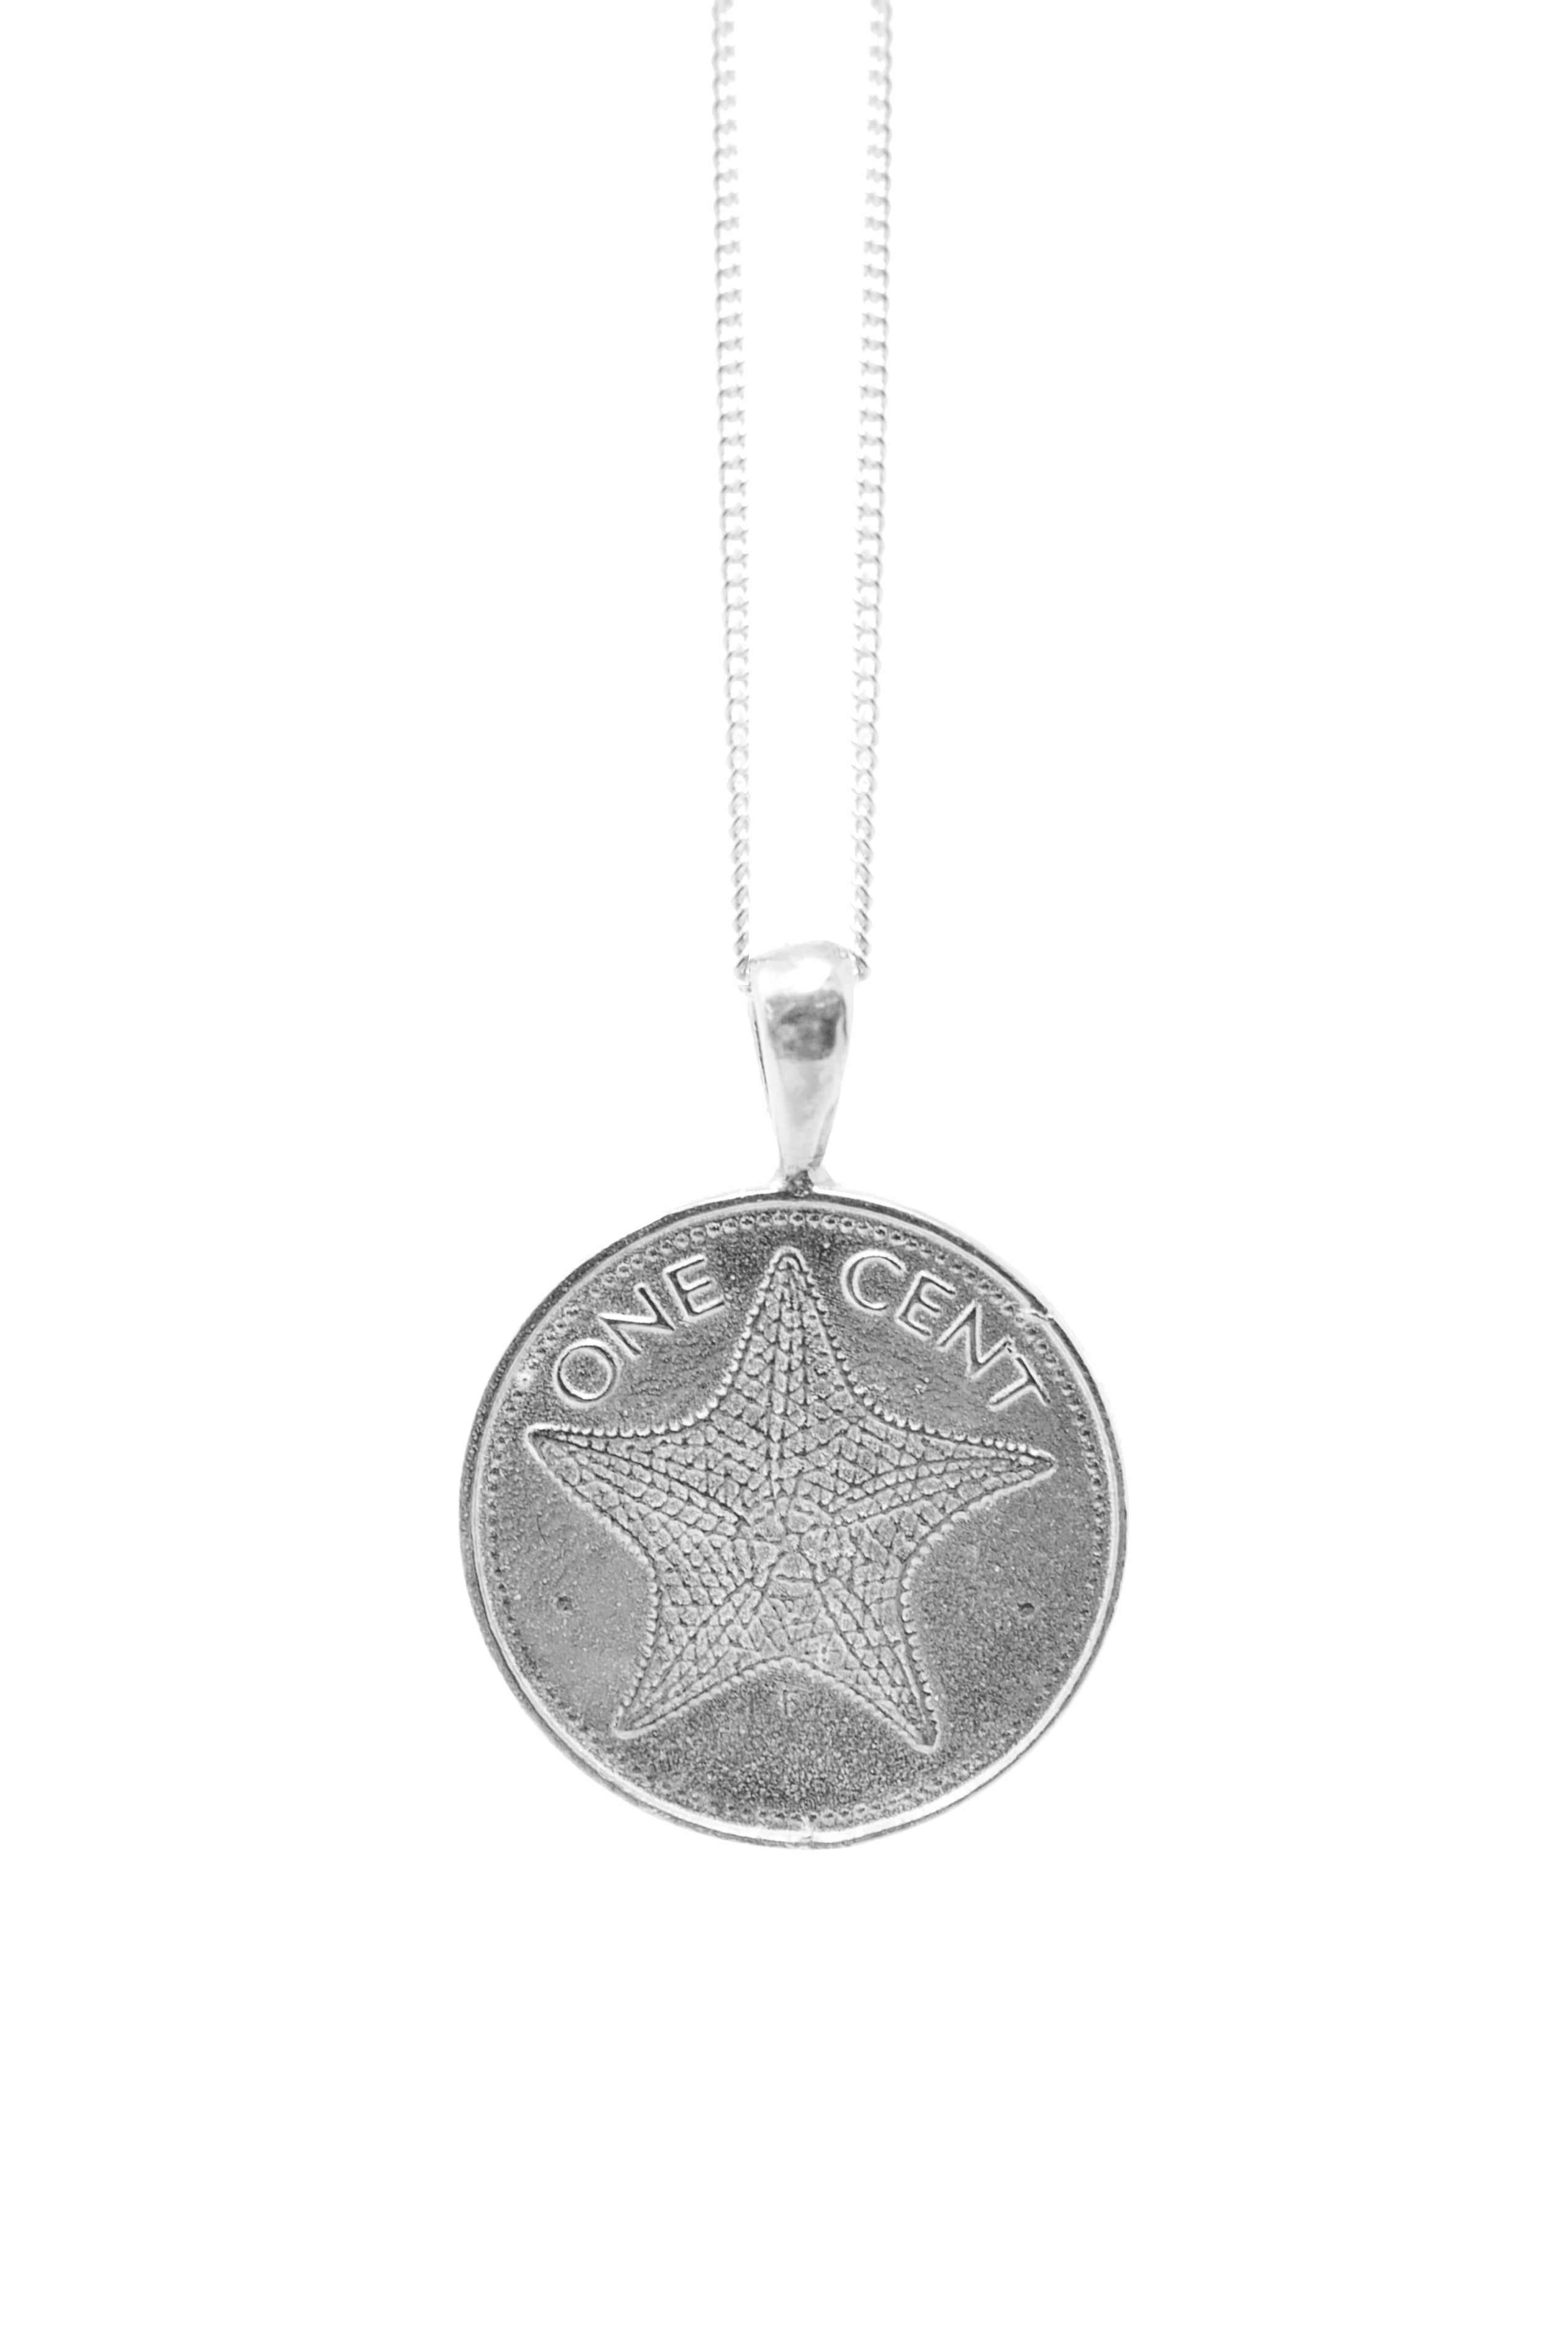 The BAHAMAS Starfish Coin Necklace